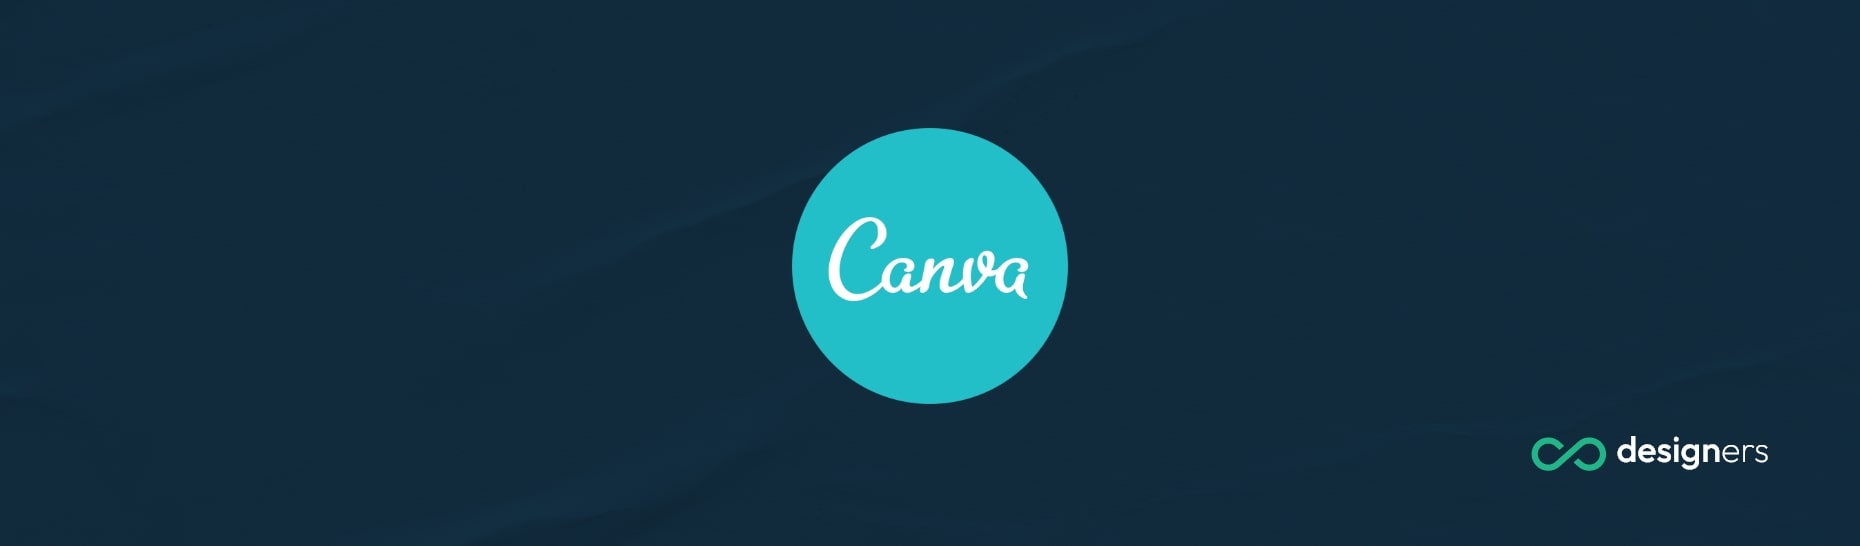 Is Canva Overpriced?